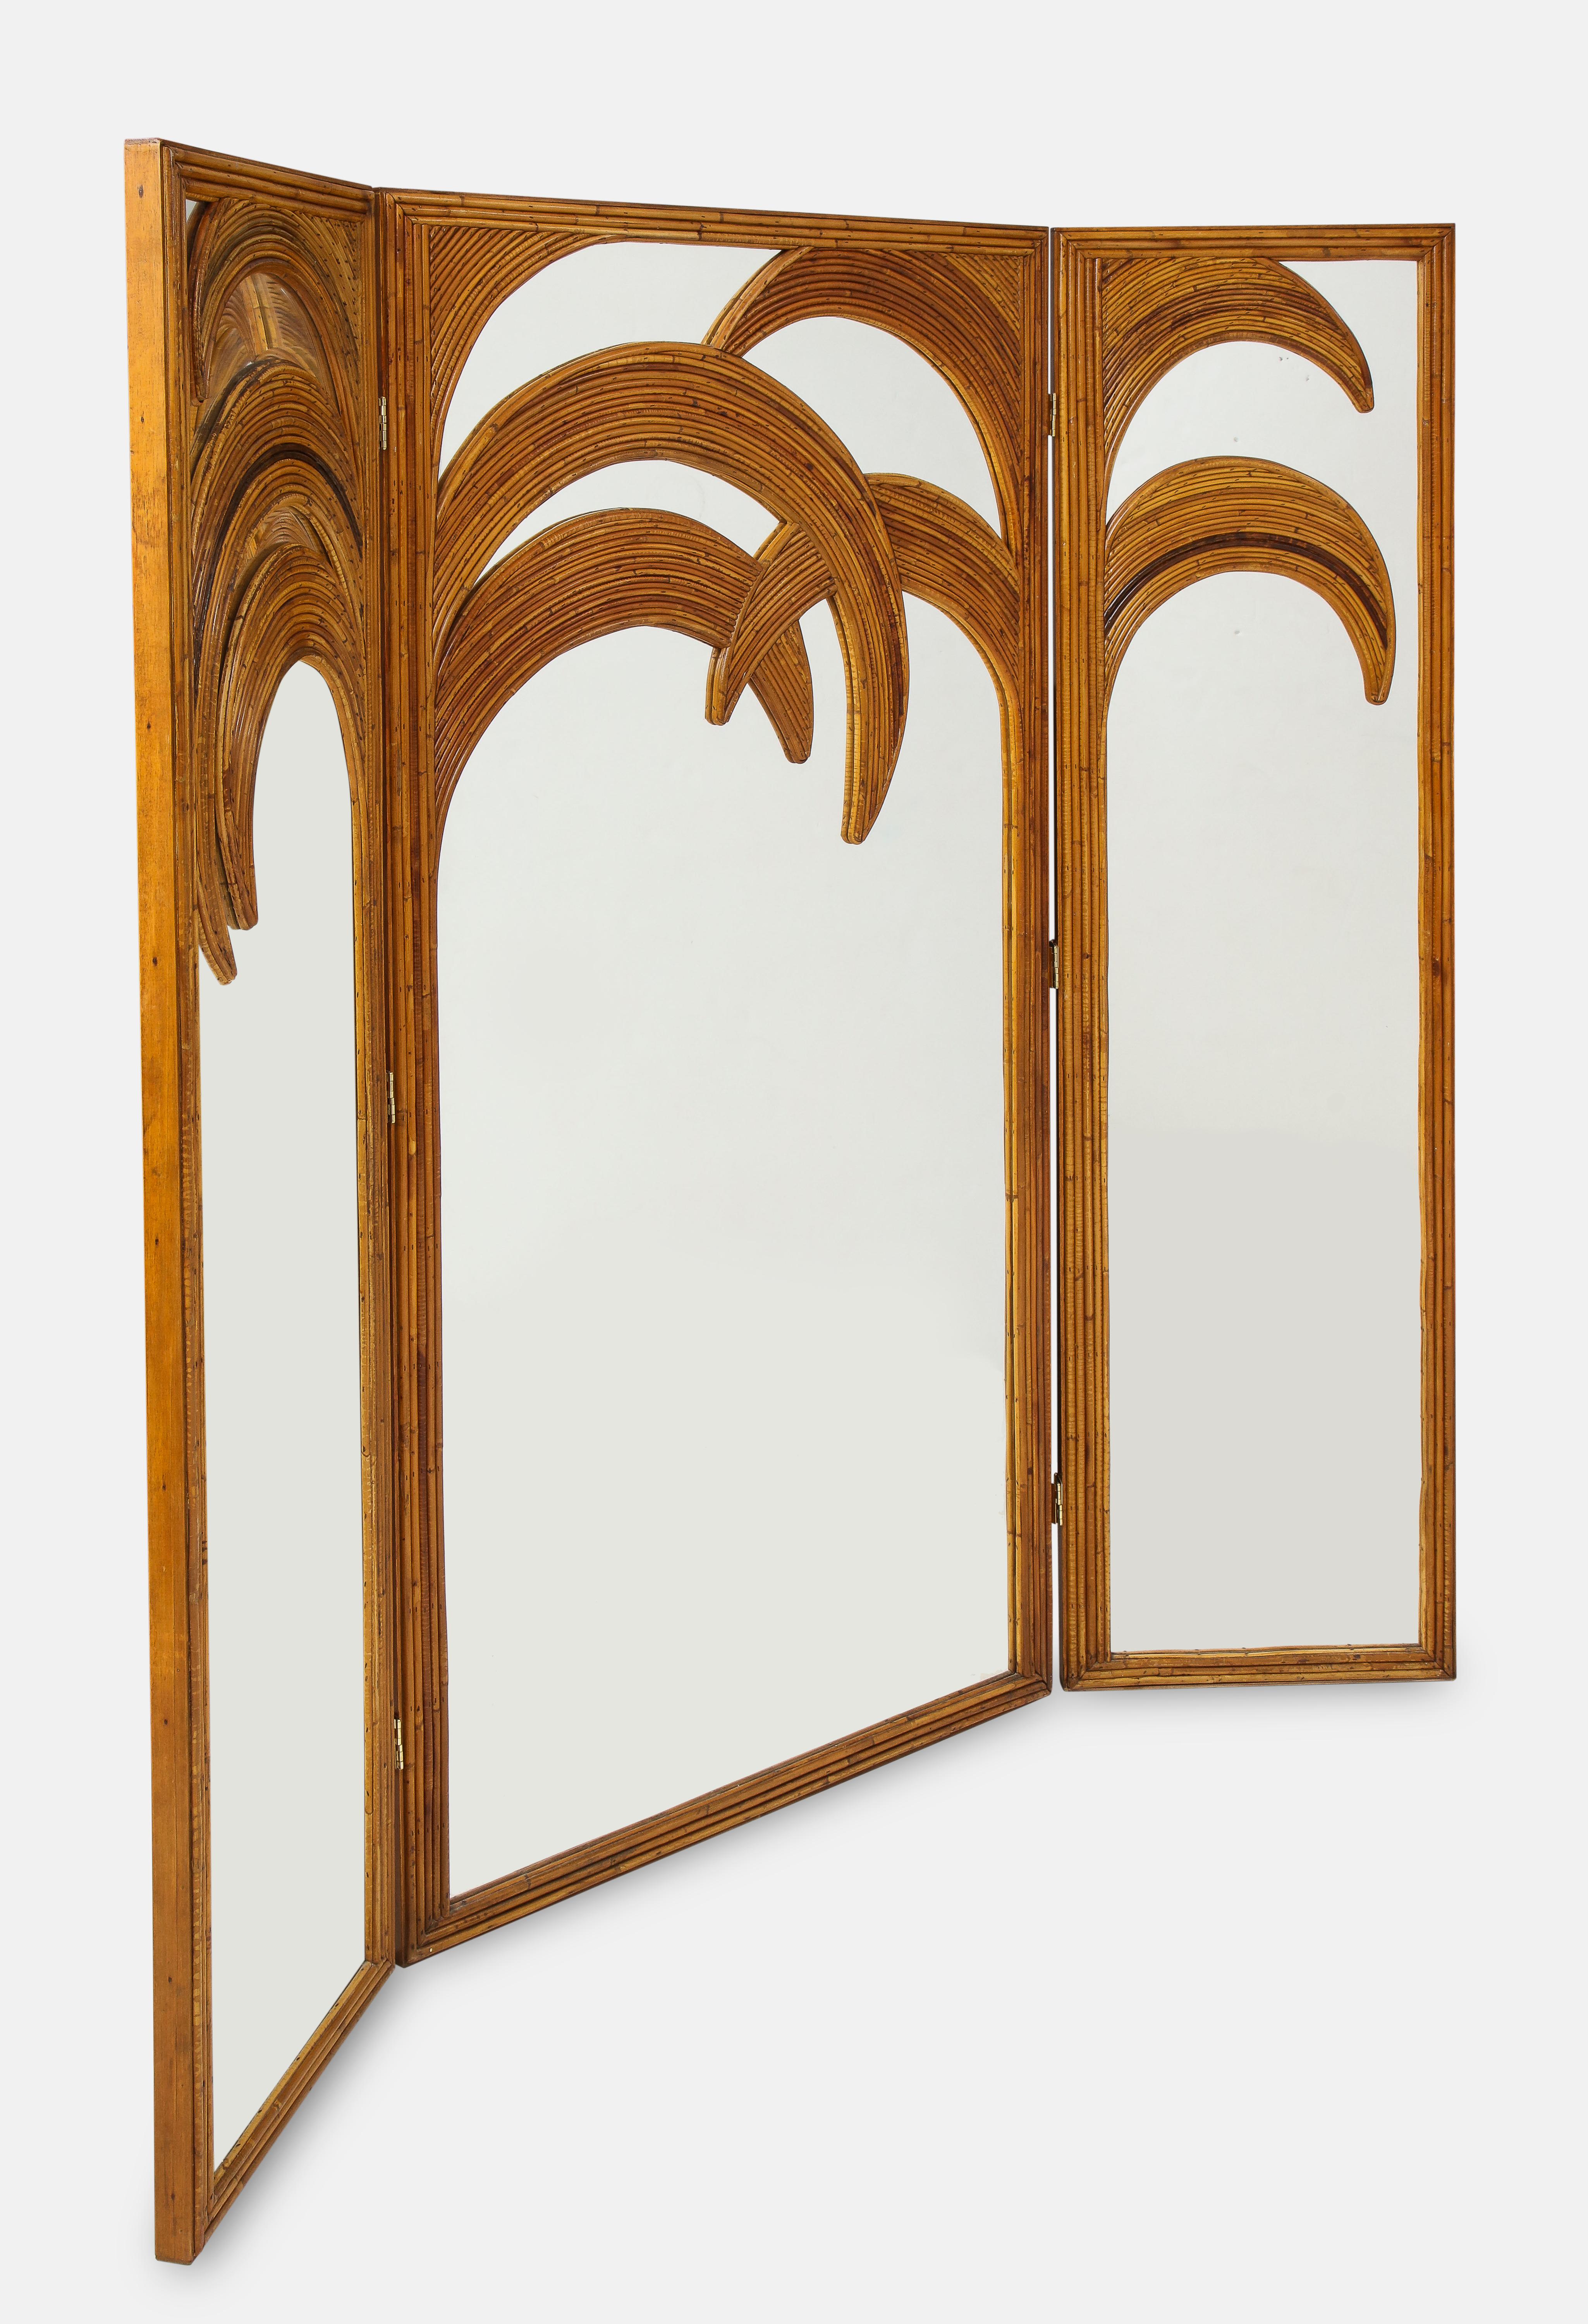 Vivai del Sud bamboo palm trees mirrored screen from the 'Parma' series, Italy, 1970s. This exquisite screen consists of handmade bamboo palm tree motif inlay on a 3-panel mirrored screen. These panels are expertly constructed from a padding over a